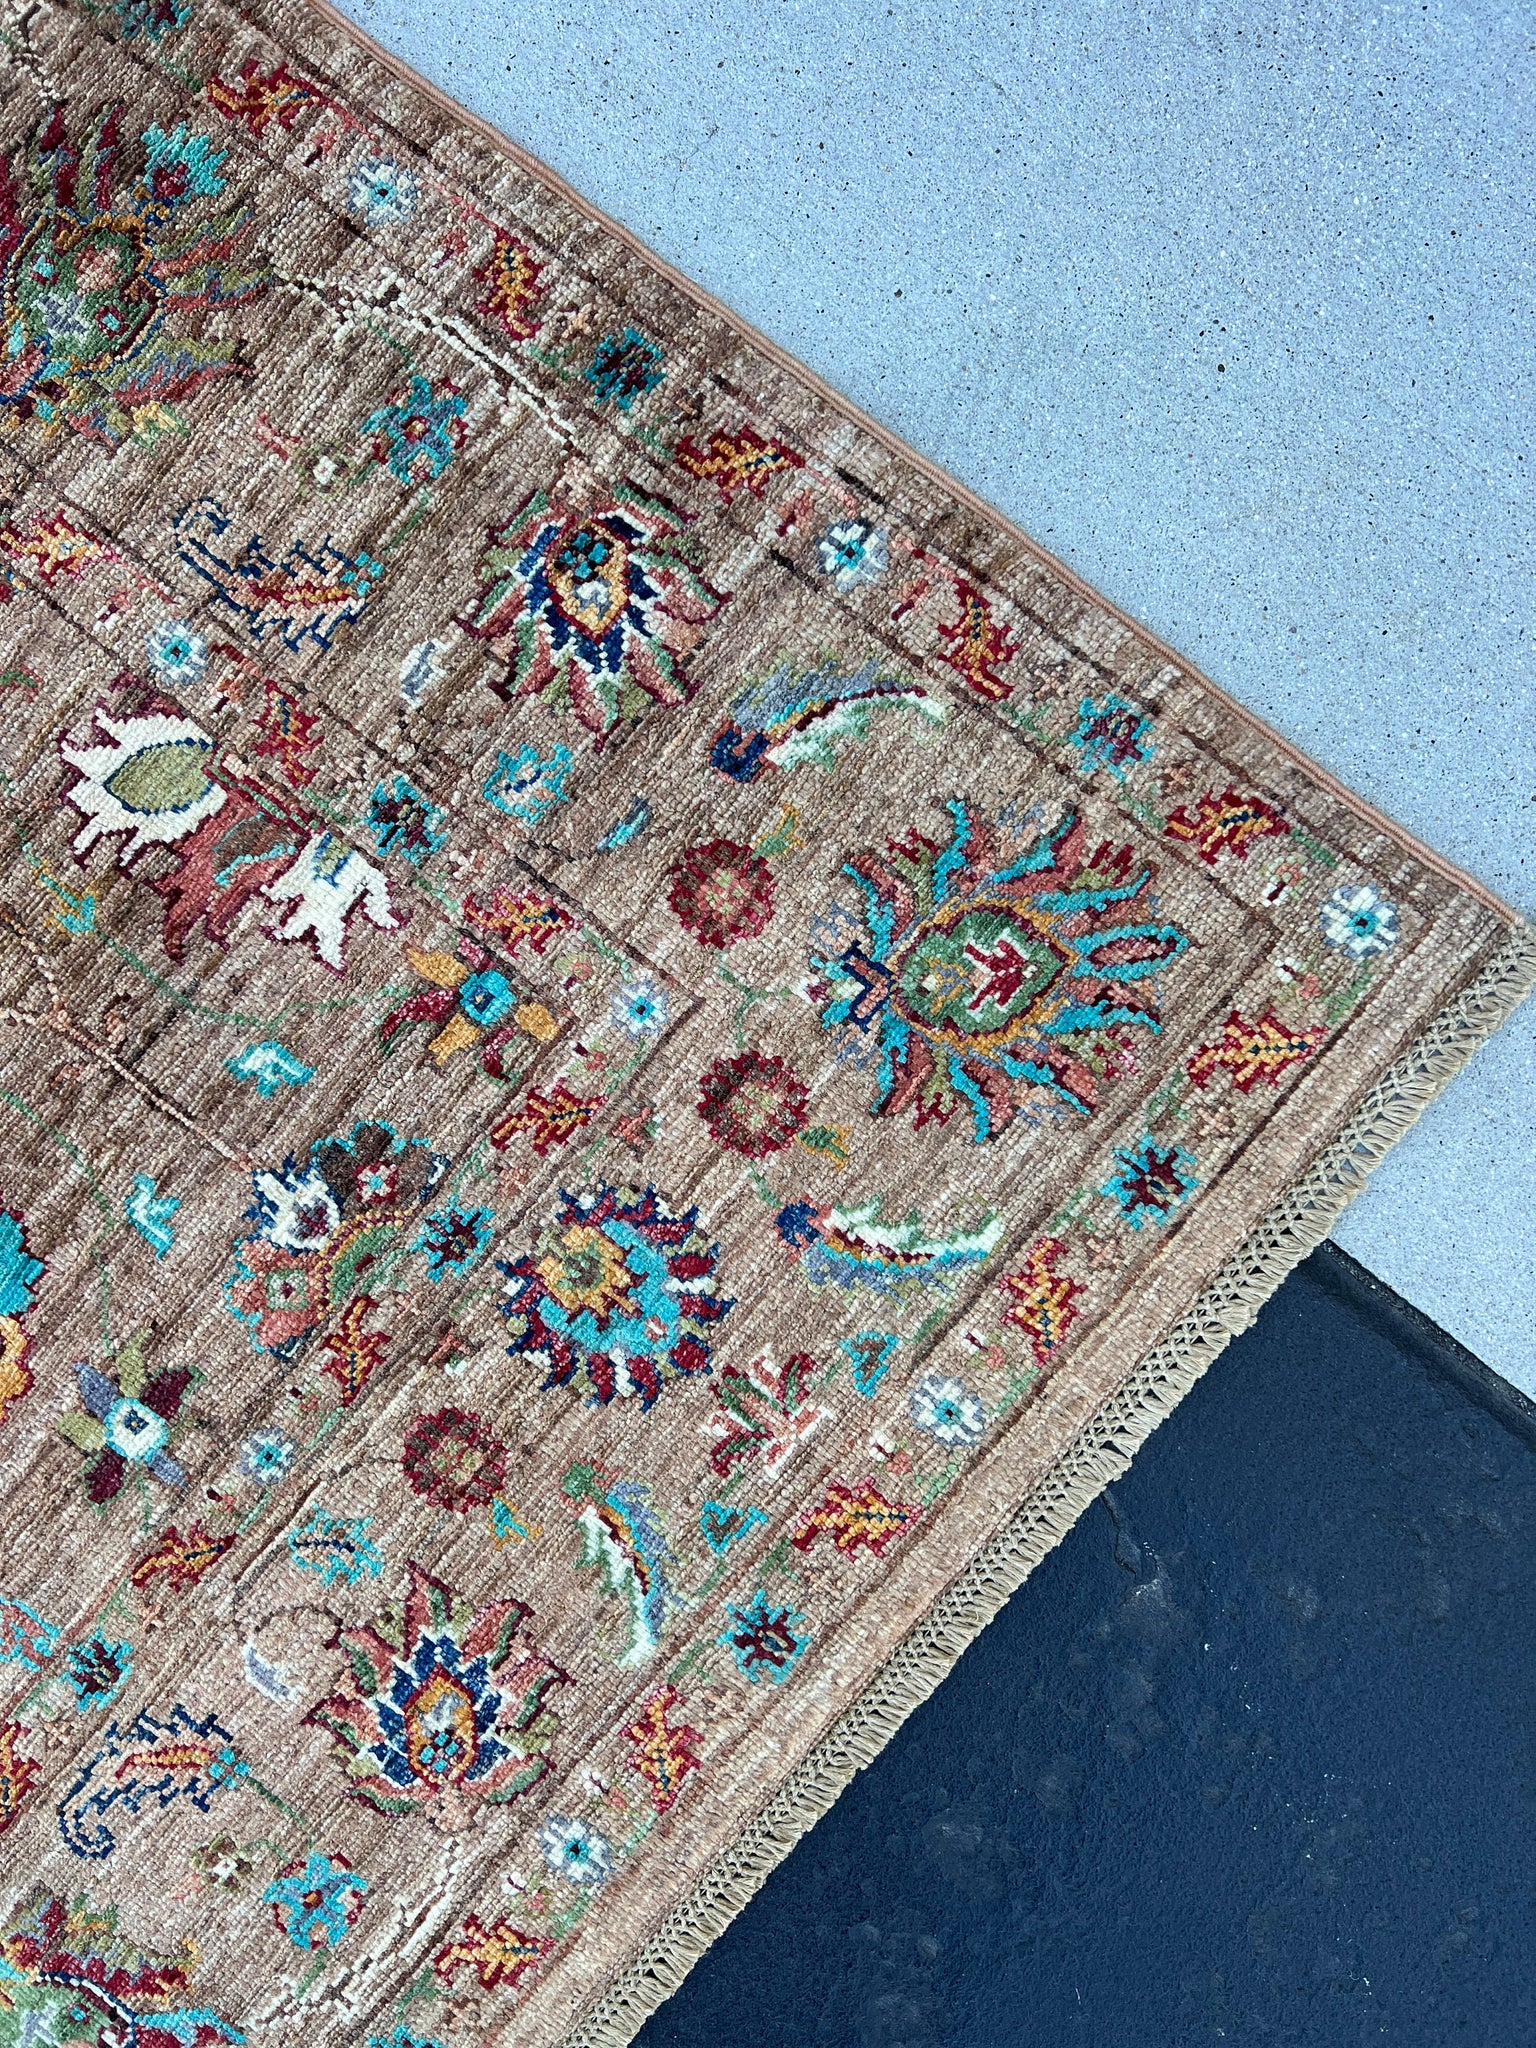 5x7 (150x215) Handmade Afghan Rug | Chocolate Brown Sky Blue Turquoise Brick Red Ivory Green Muted Brown Blue Floral Tribal Knotted Persian